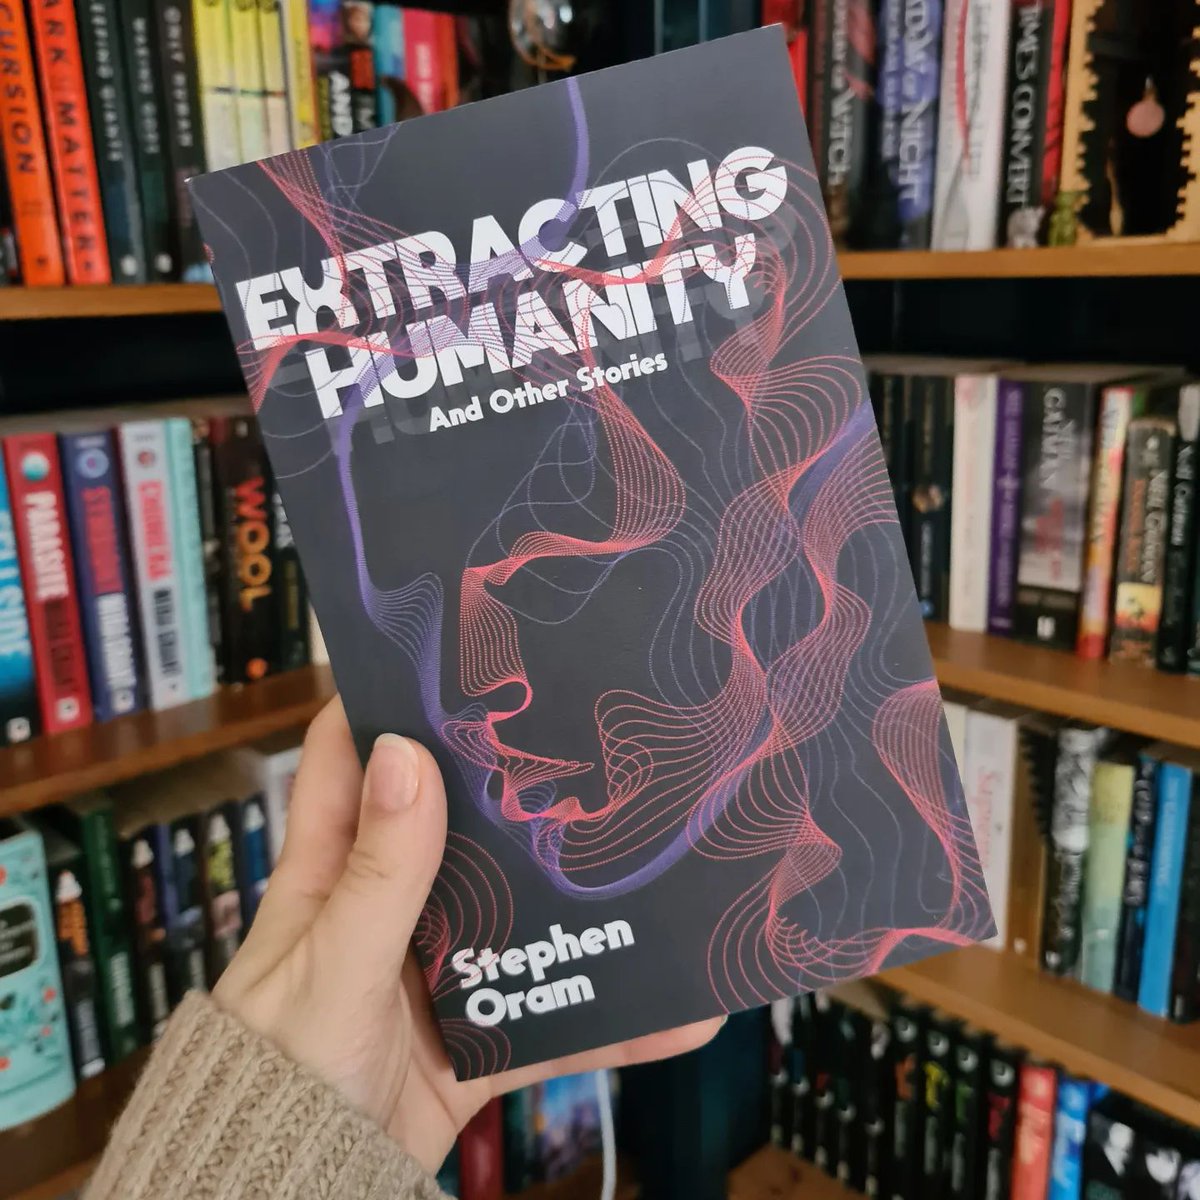 #BlogTour Extracting Humanity by Stephen Oram ✨️ 'This was a thought-provoking short story collection. It really invites the reader to the near future to consider how advancing technology will change everything. They show a utopia as well as a dystopia' - Eleanor Nicbhatair